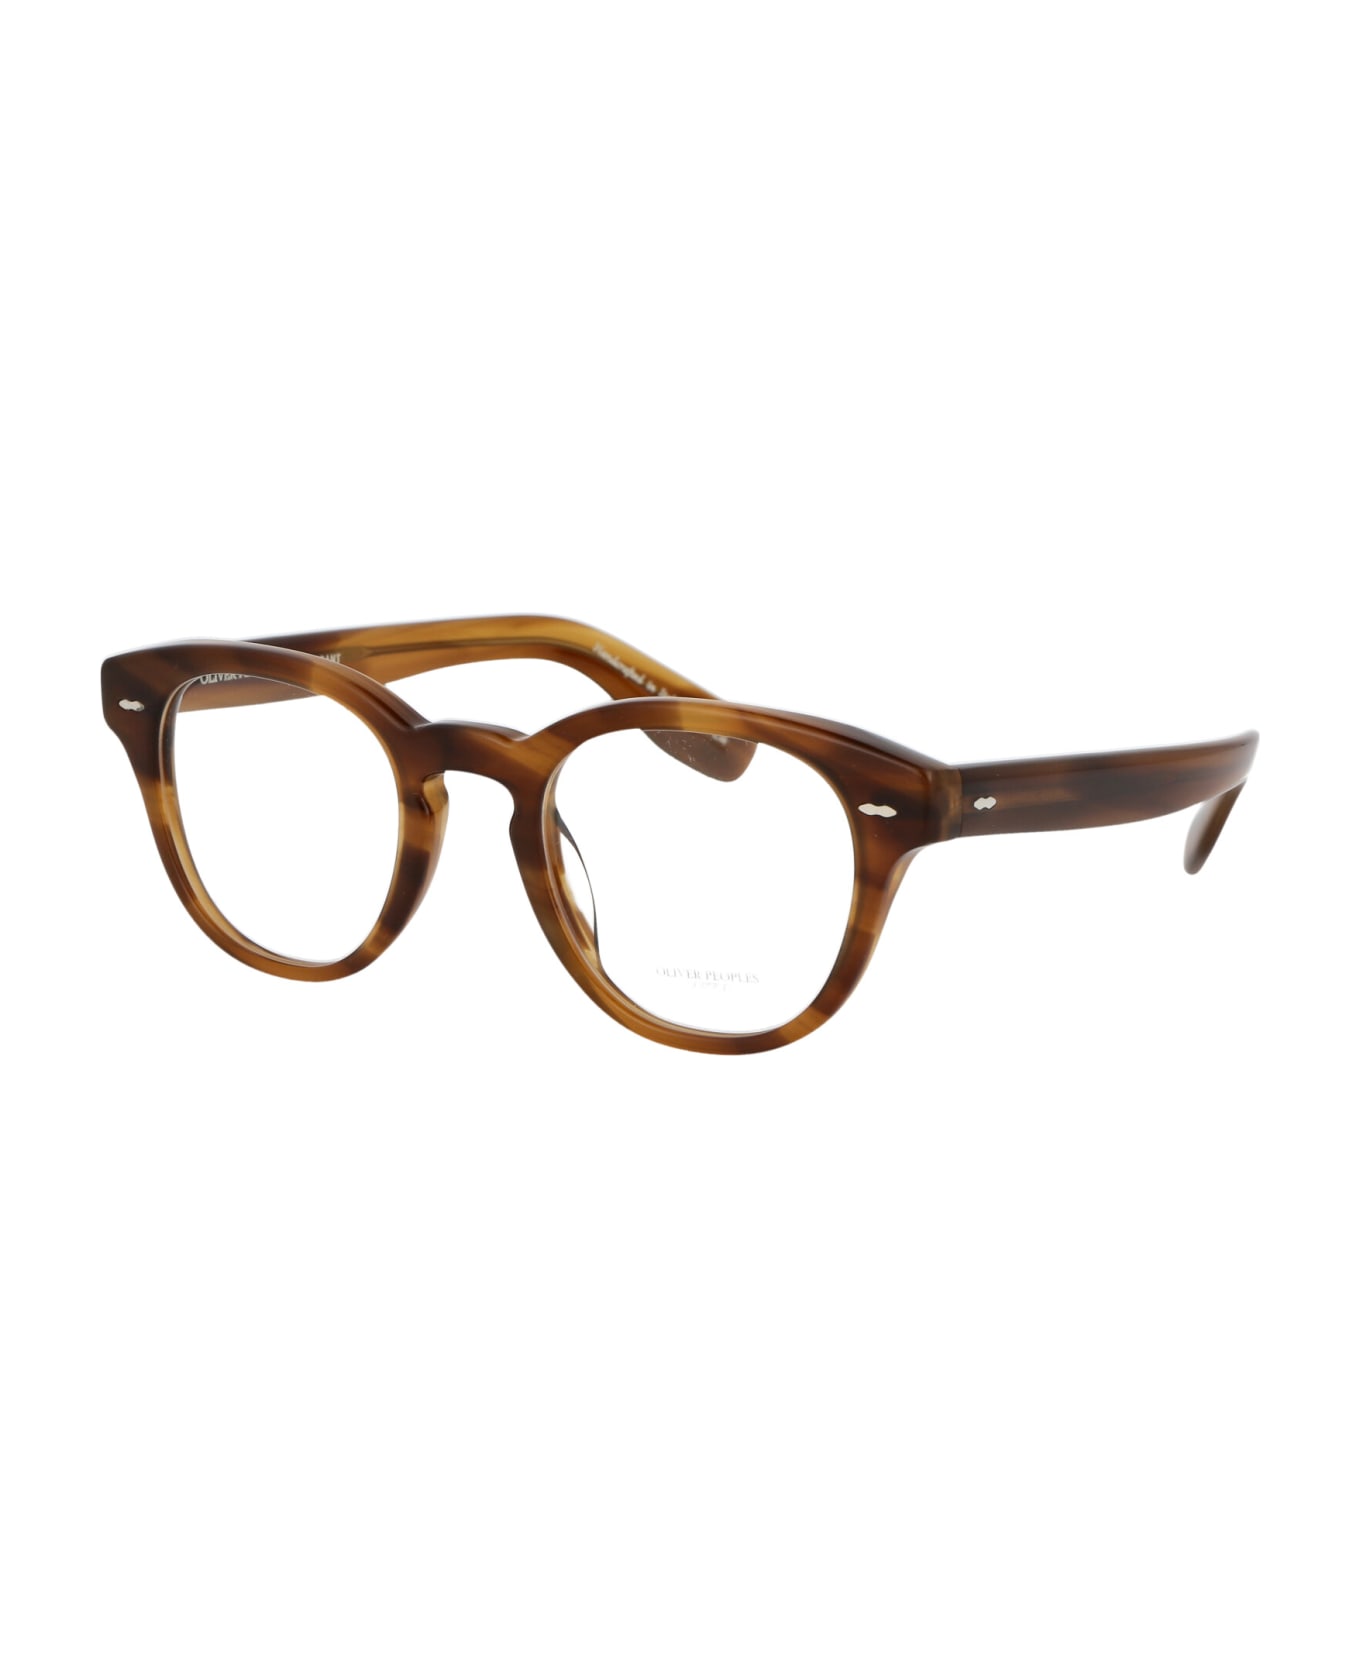 Oliver Peoples Cary Grant Glasses - 1011 RAINTREE